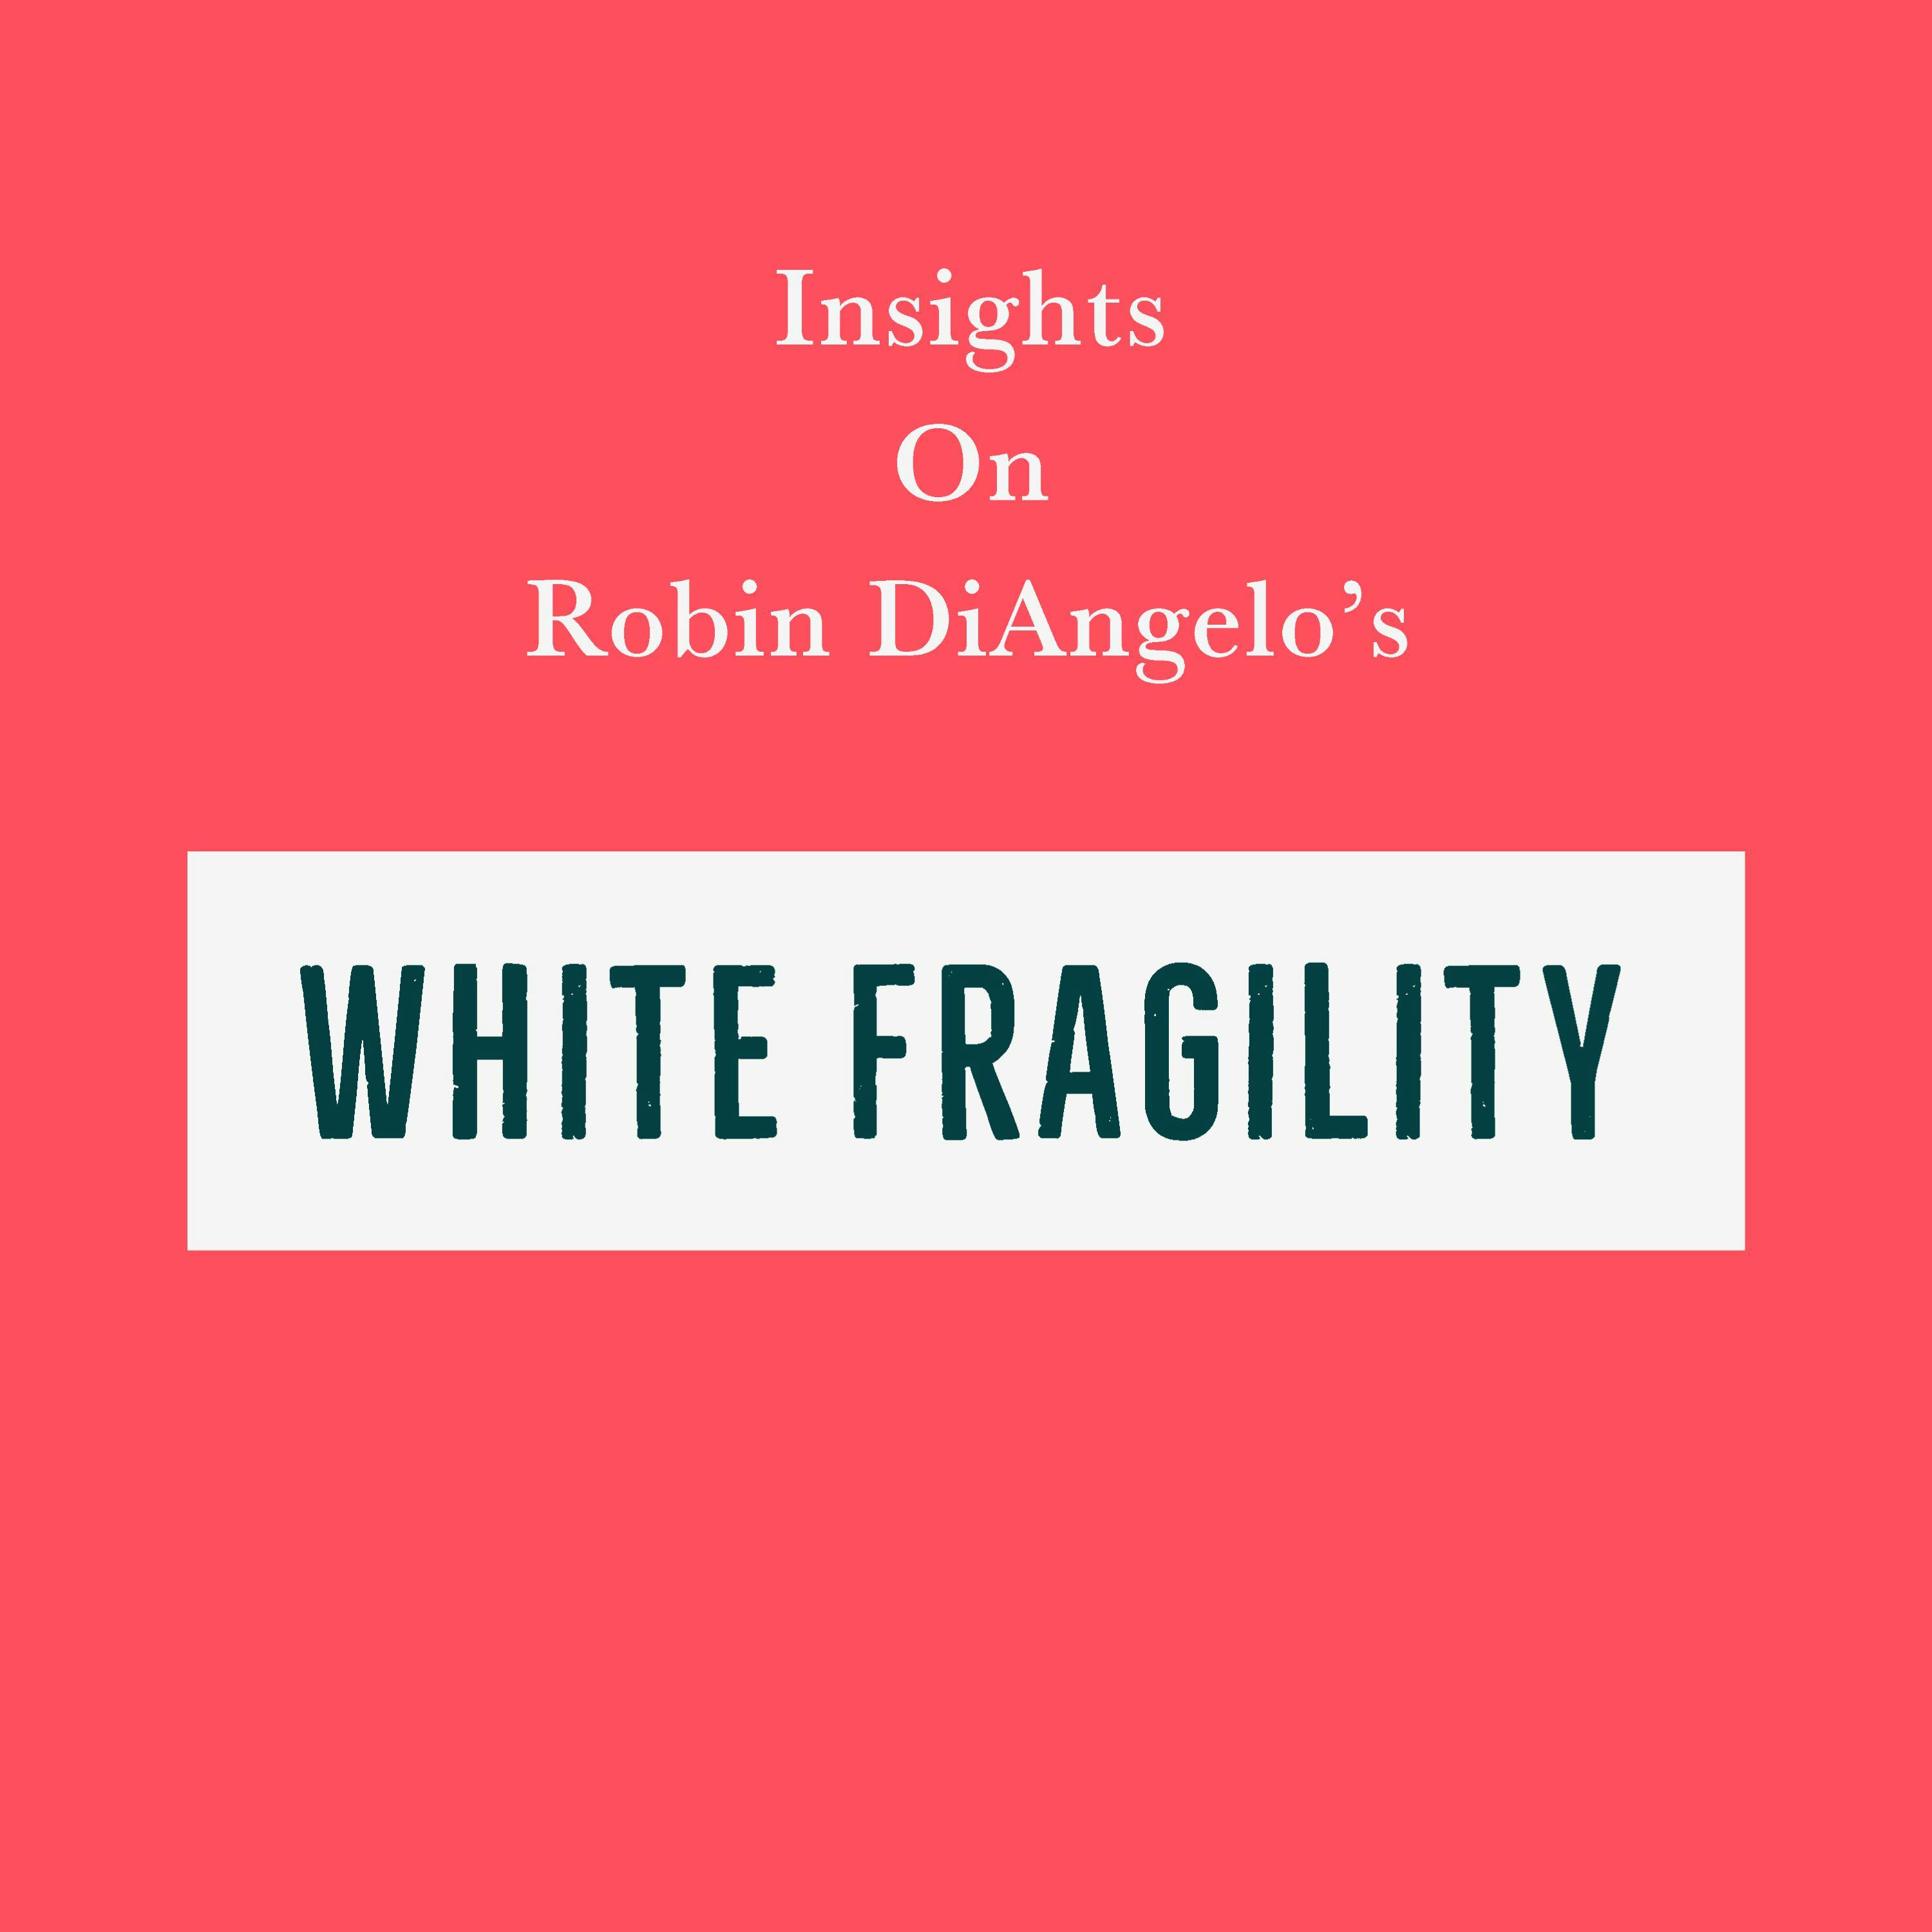 Insights on Robin DiAngelo’s White Fragility - undefined